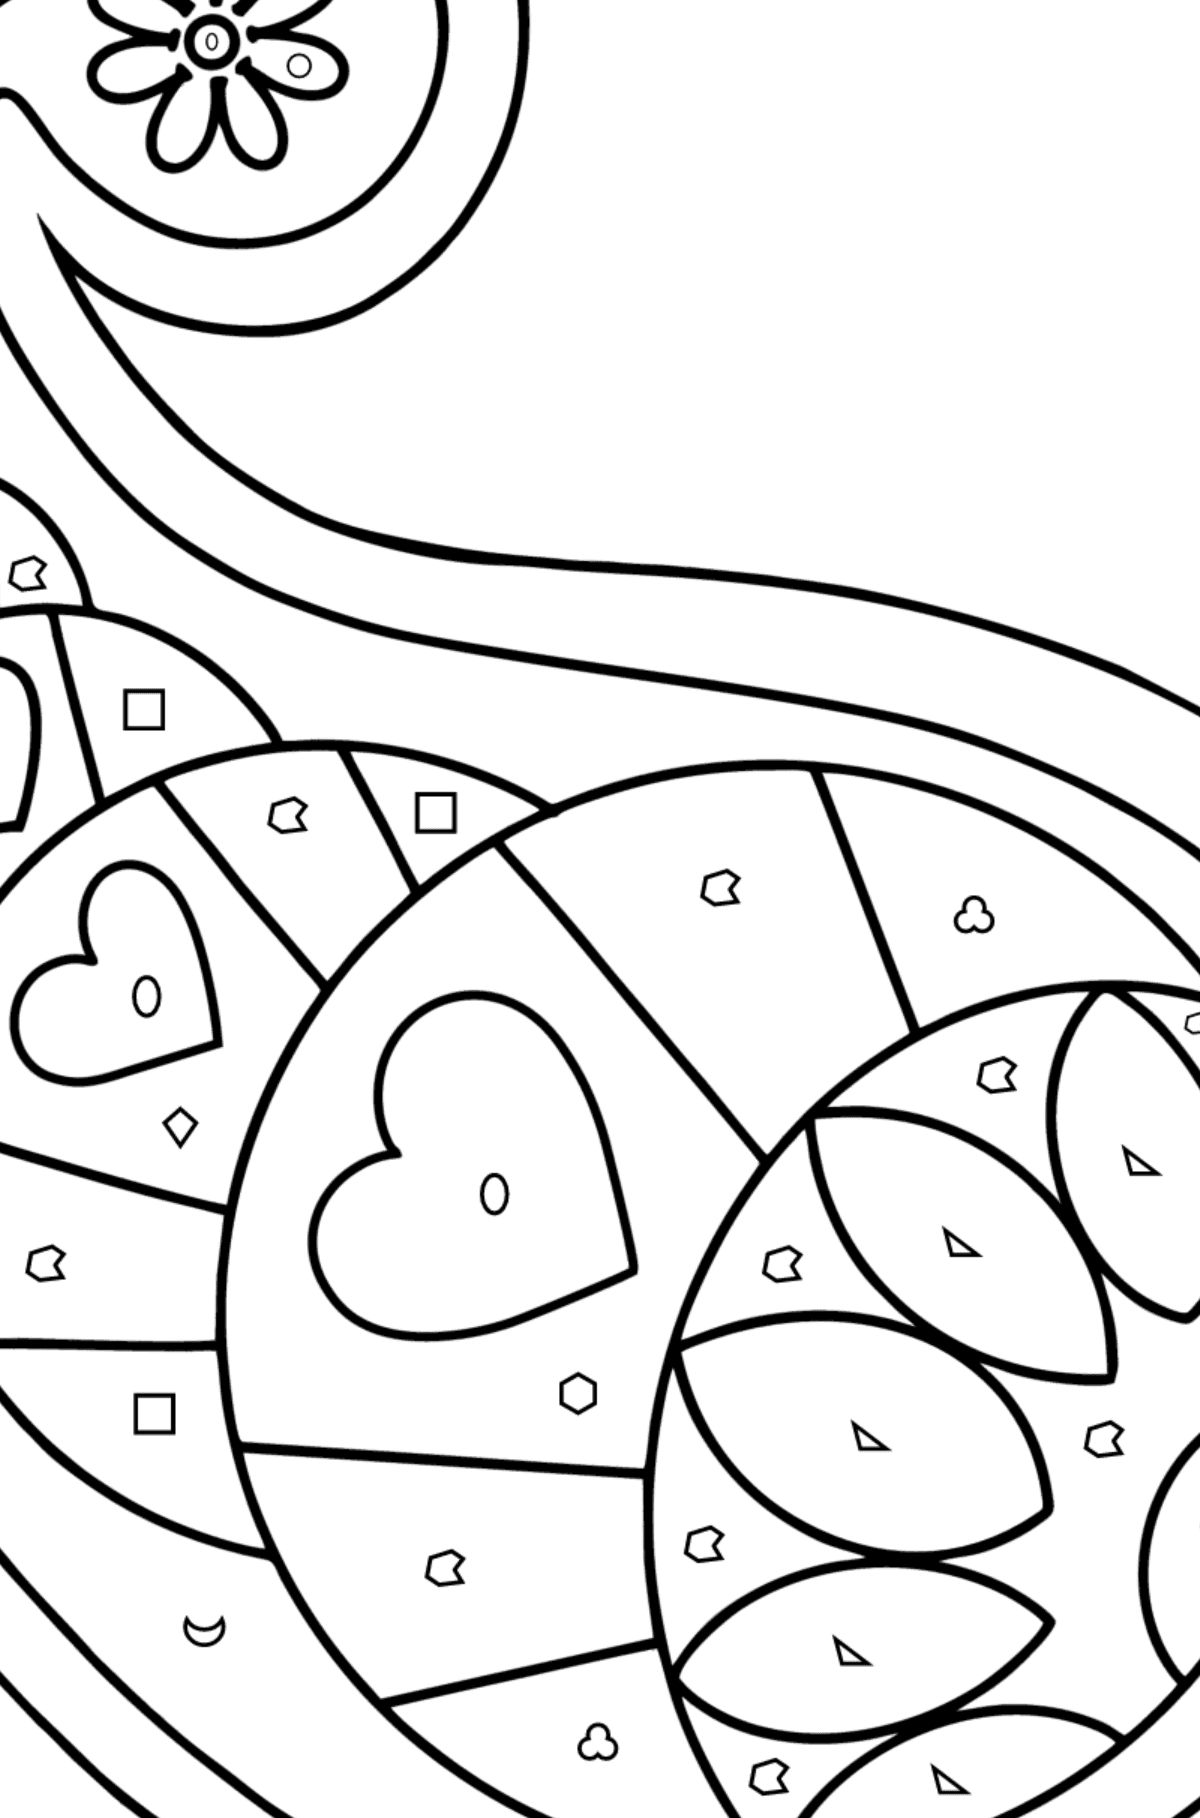 Paisley design coloring page - Coloring by Geometric Shapes for Kids